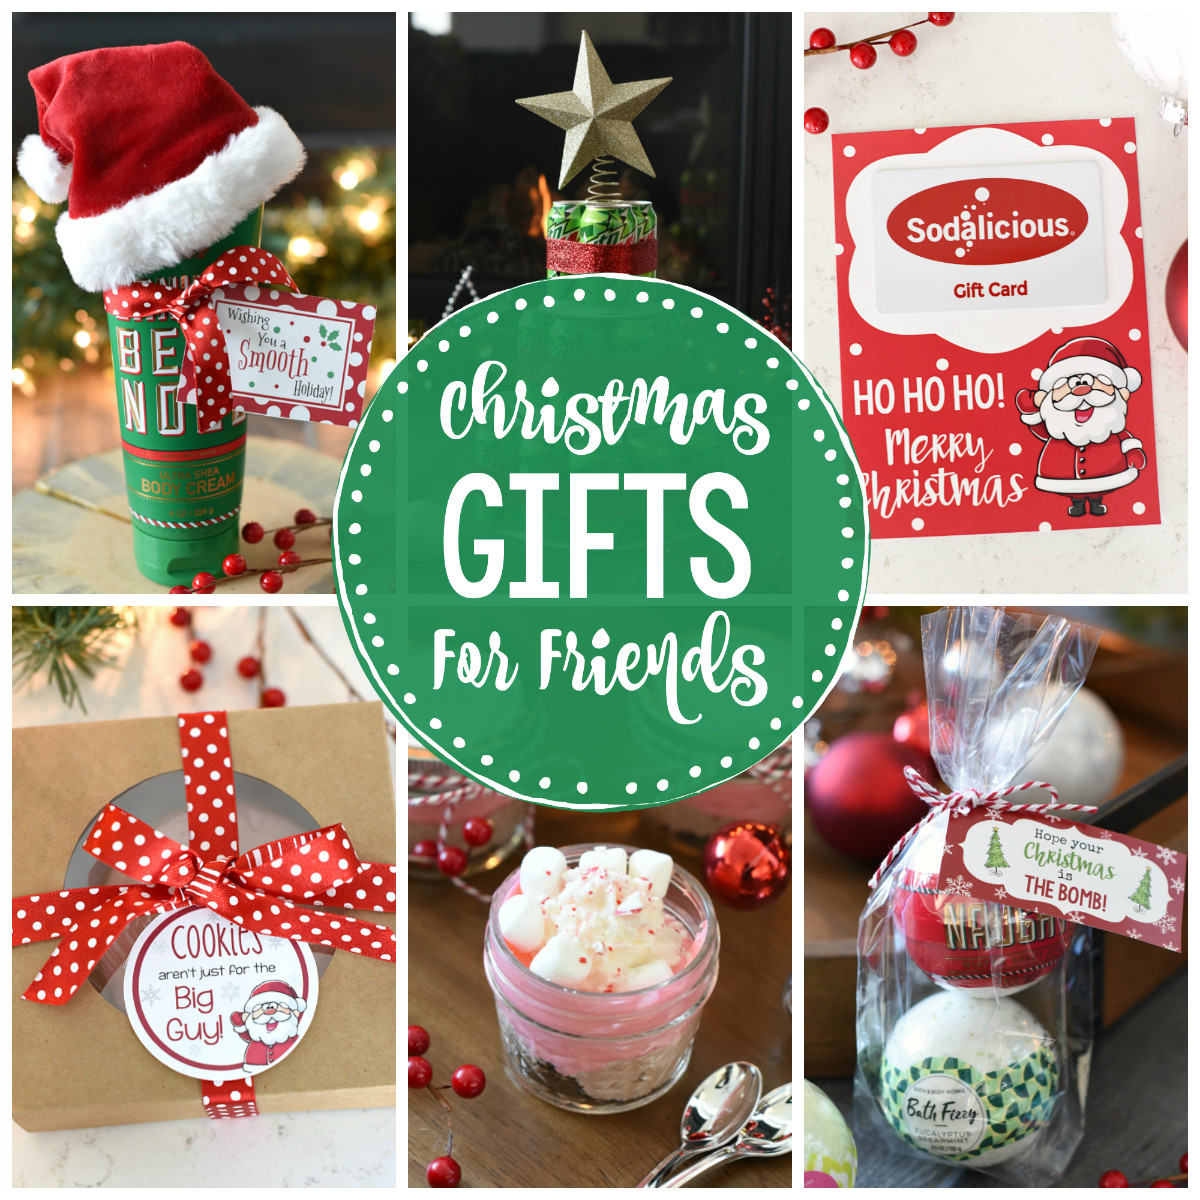 Friend Christmas Gift Ideas
 Good Gifts for Friends at Christmas – Fun Squared